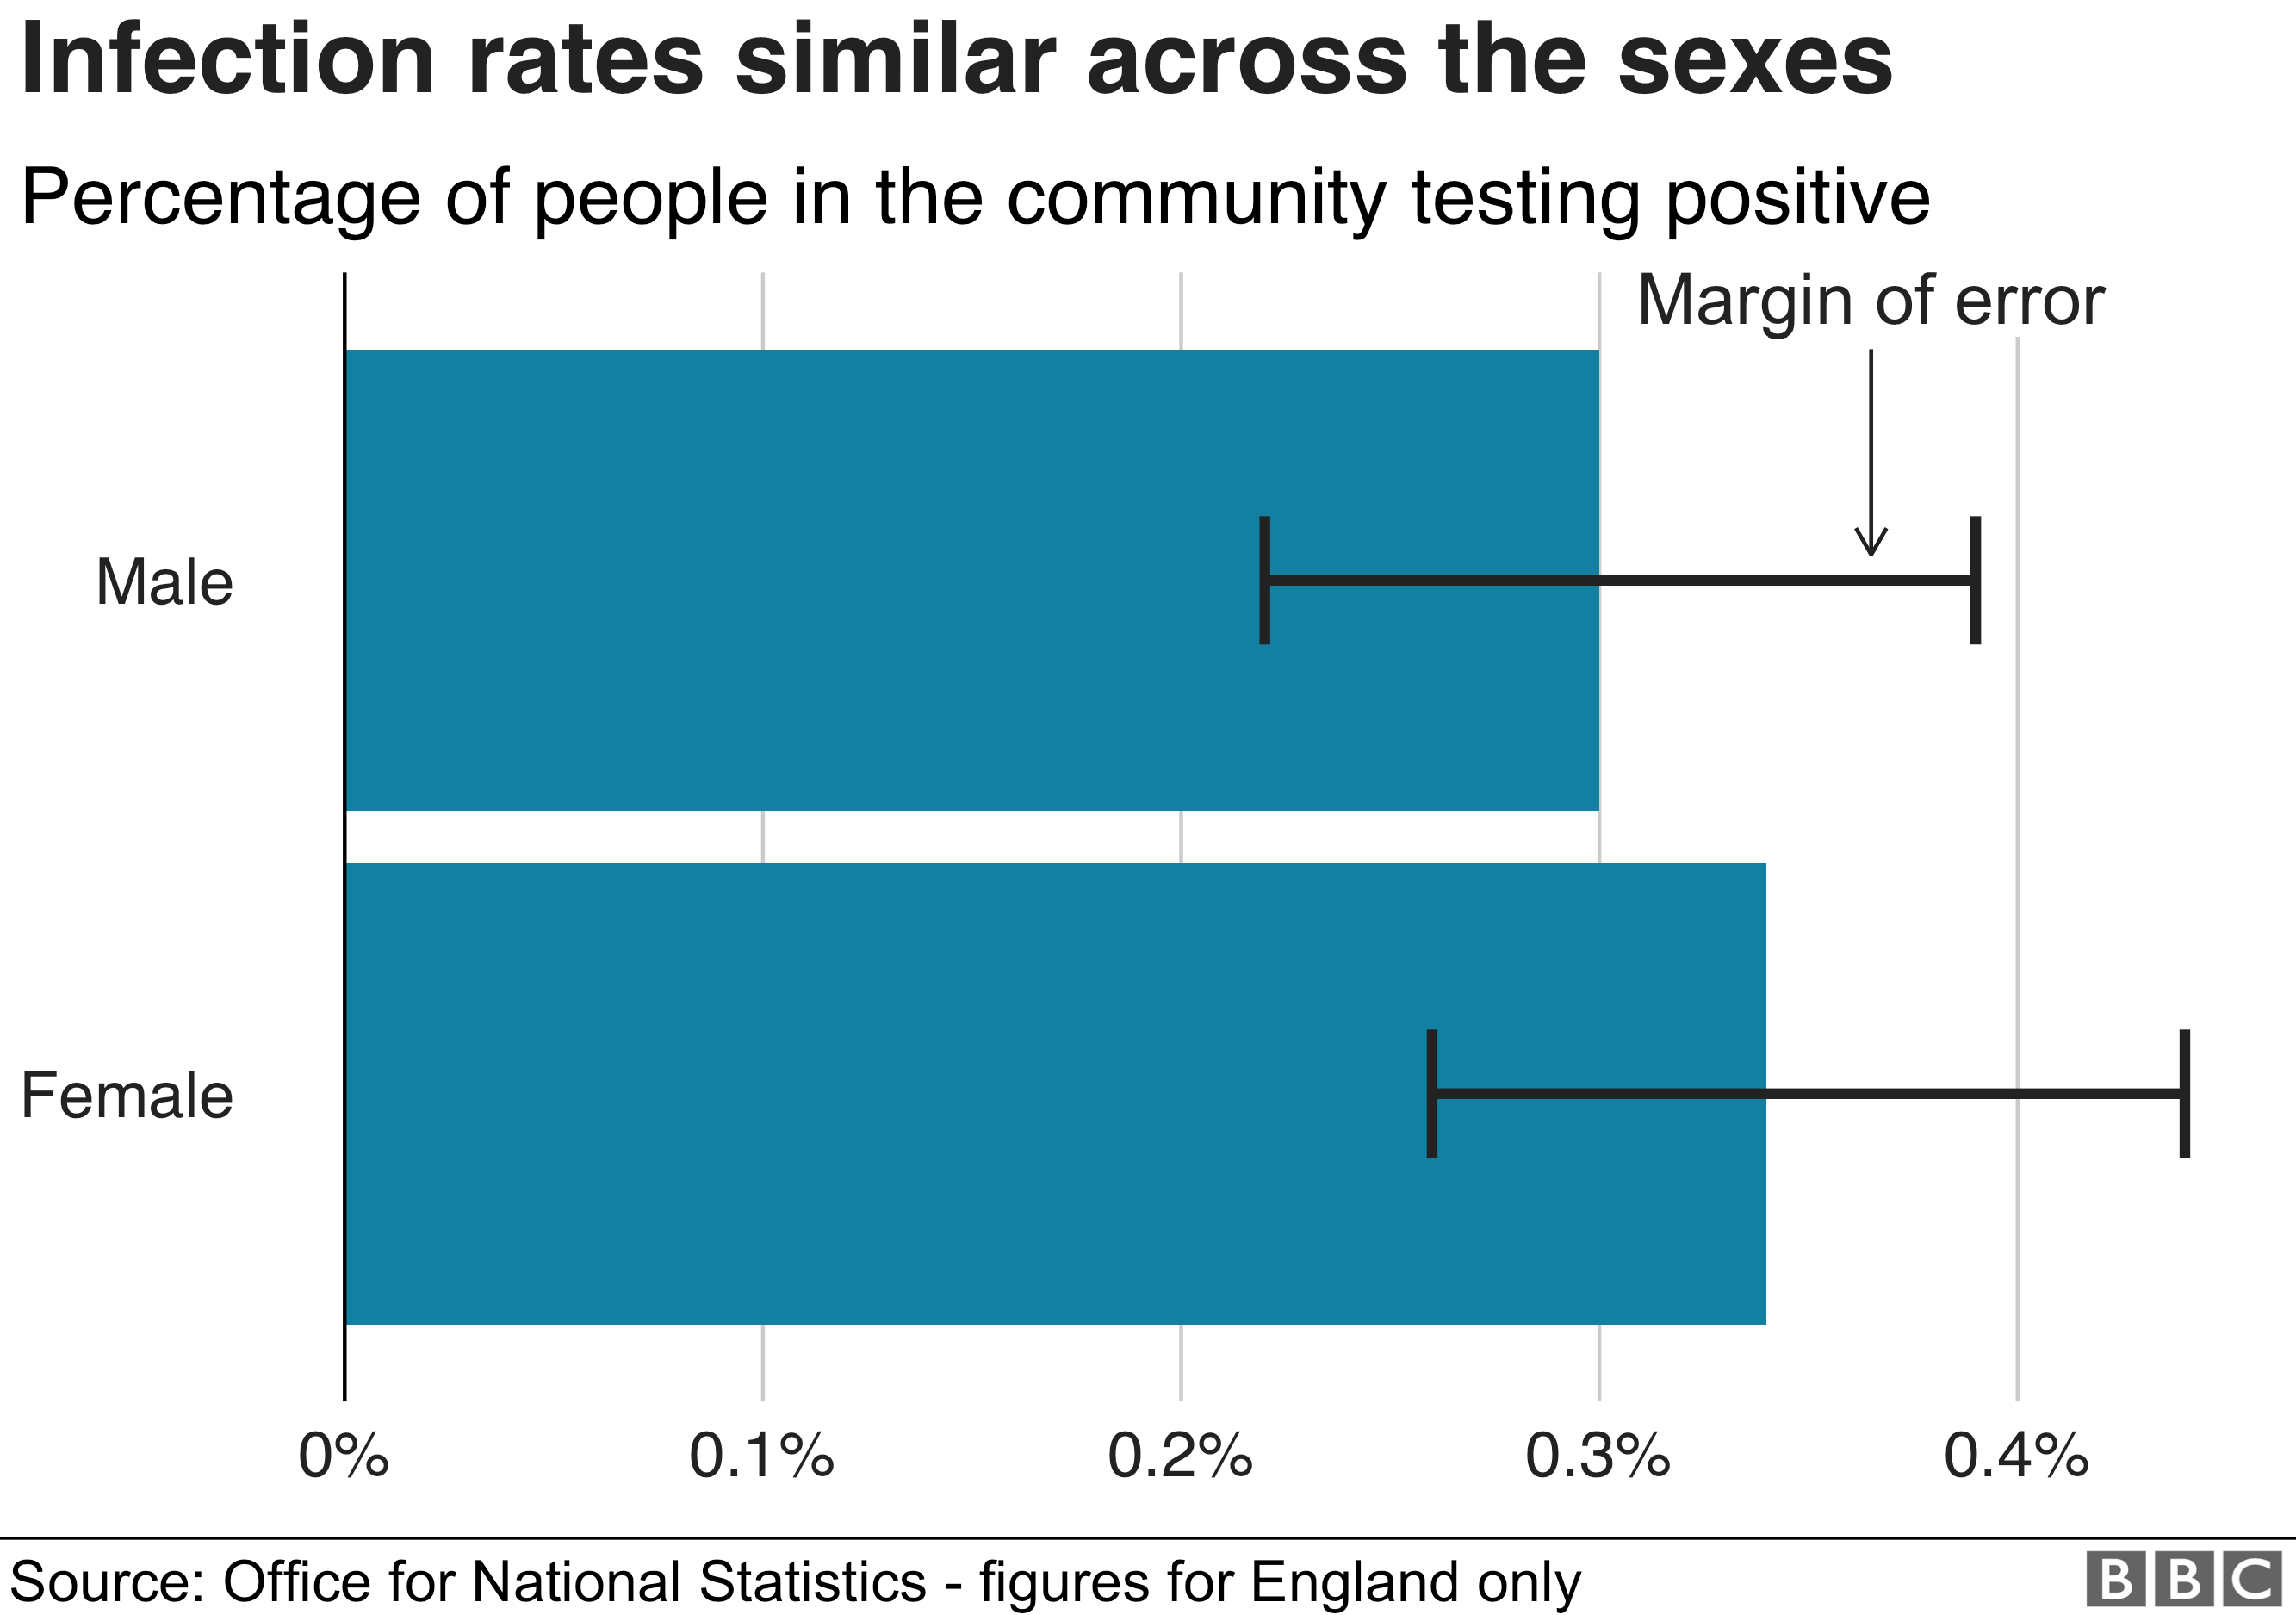 chart showing similar rates of infection between males and females